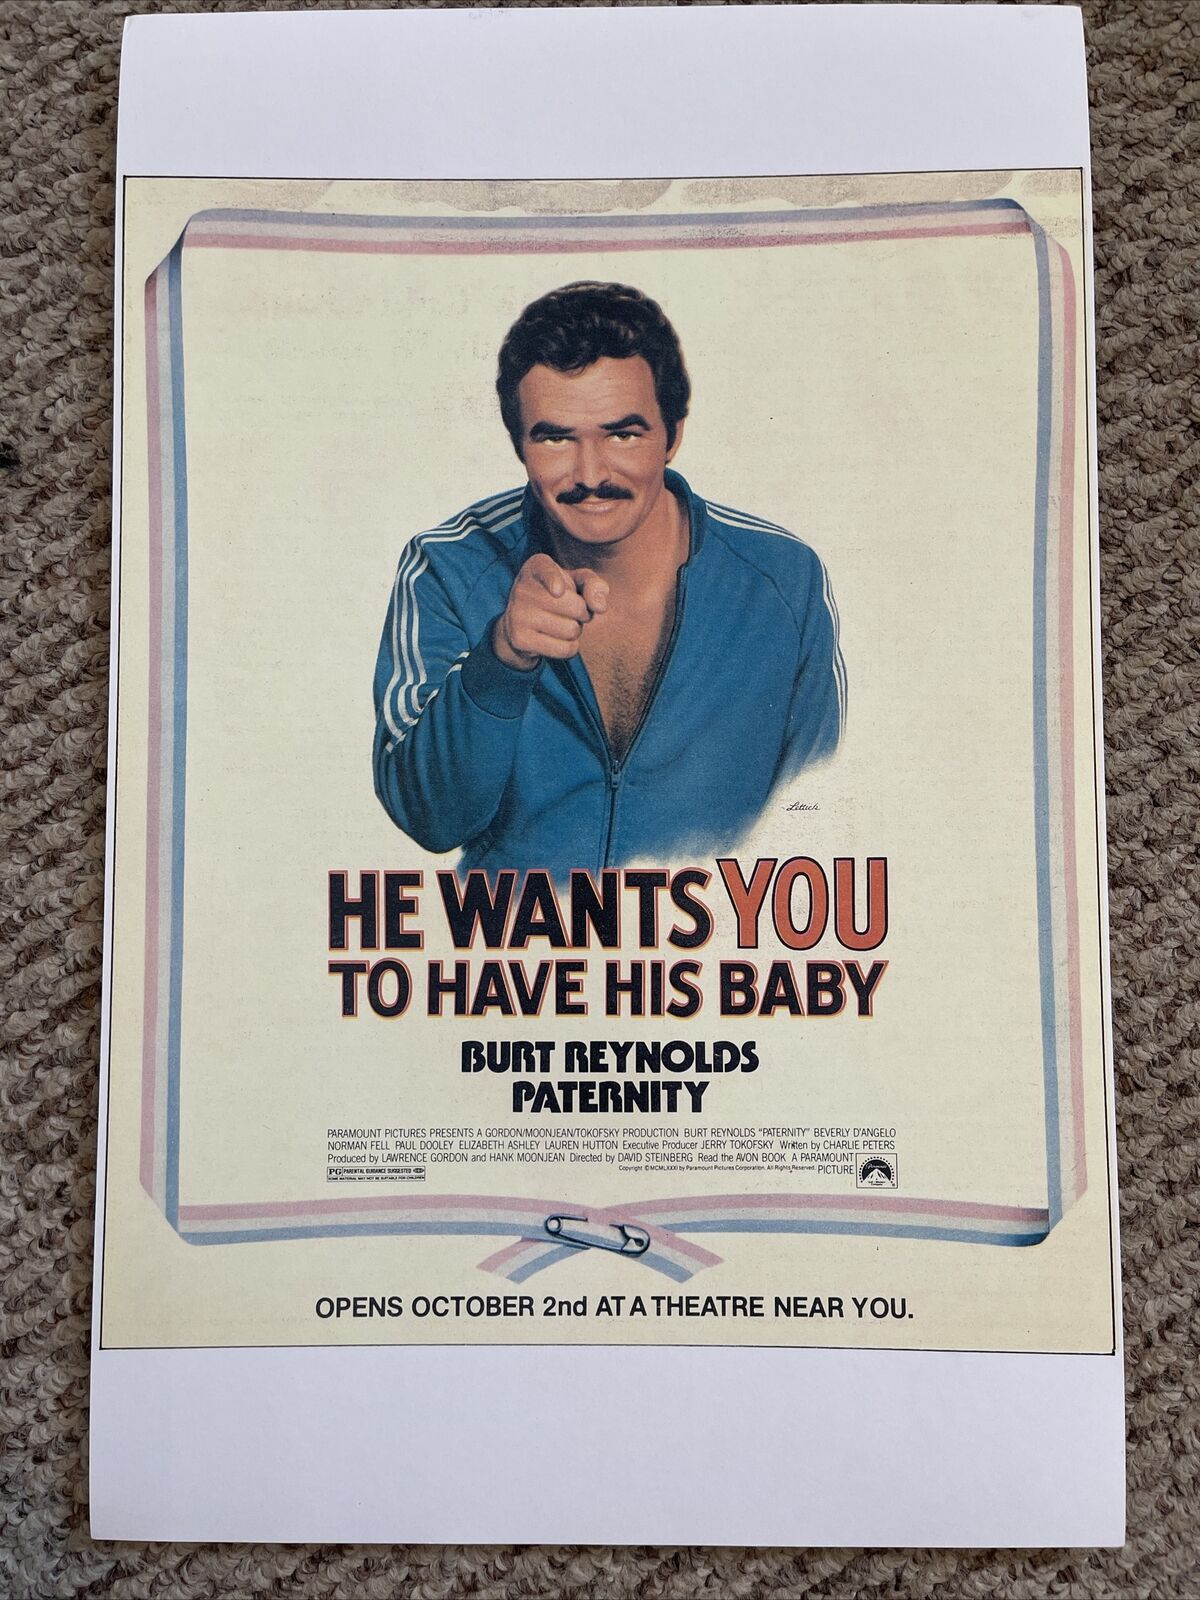 Burt Reynolds Paternity He Wants You To Have His Baby Poster 11 x 17   (64)